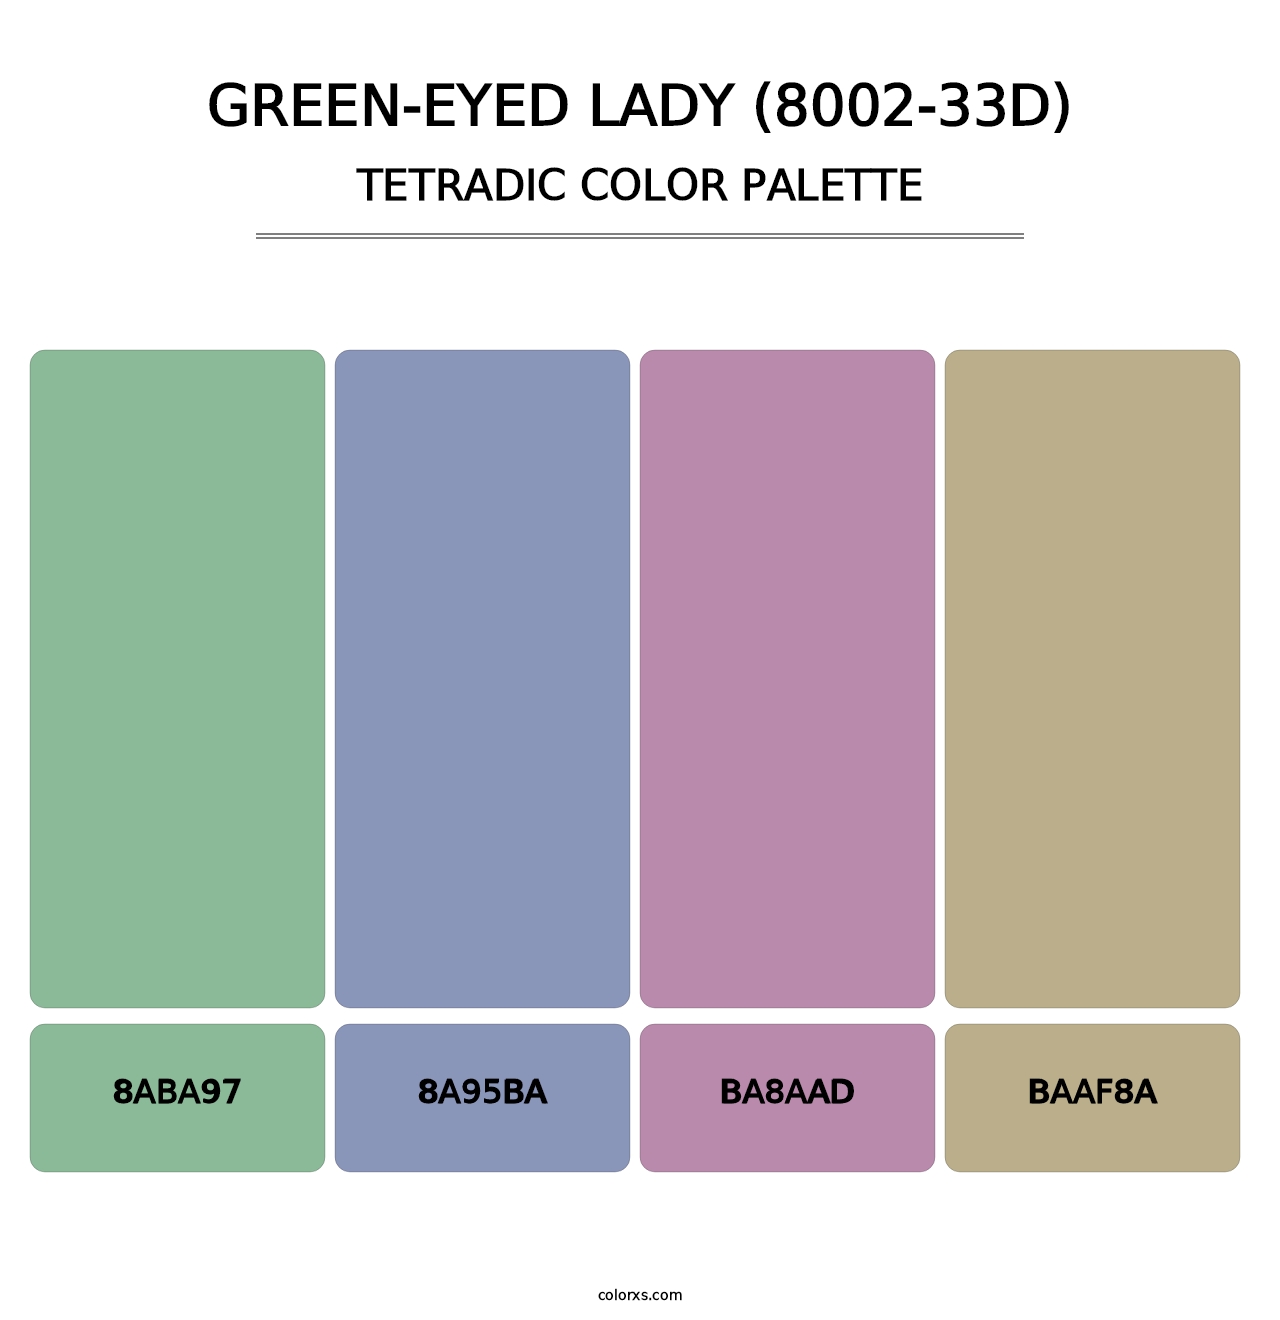 Green-Eyed Lady (8002-33D) - Tetradic Color Palette